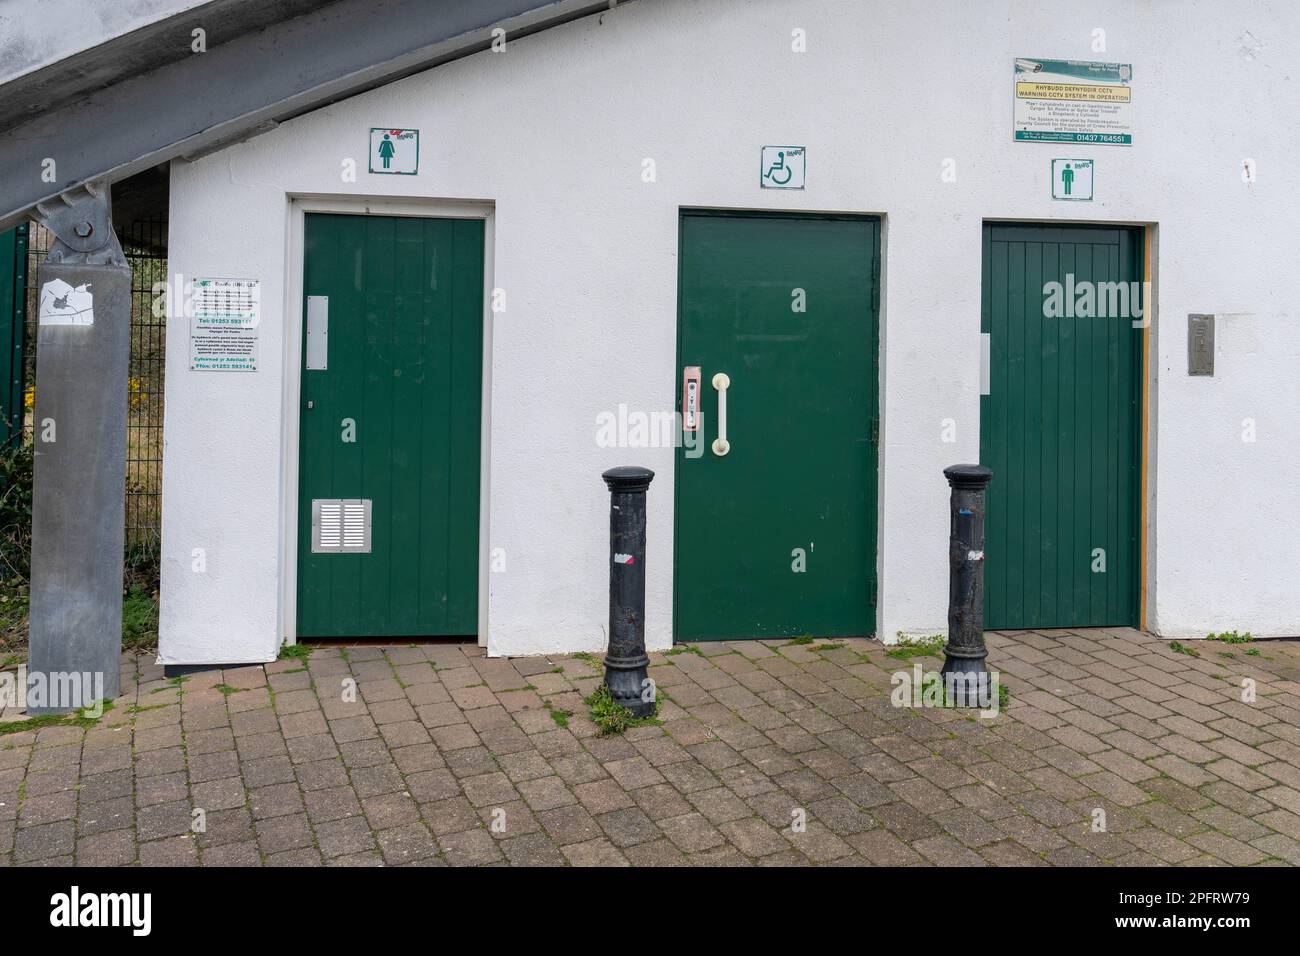 Large public toilets building in the UK Stock Photo